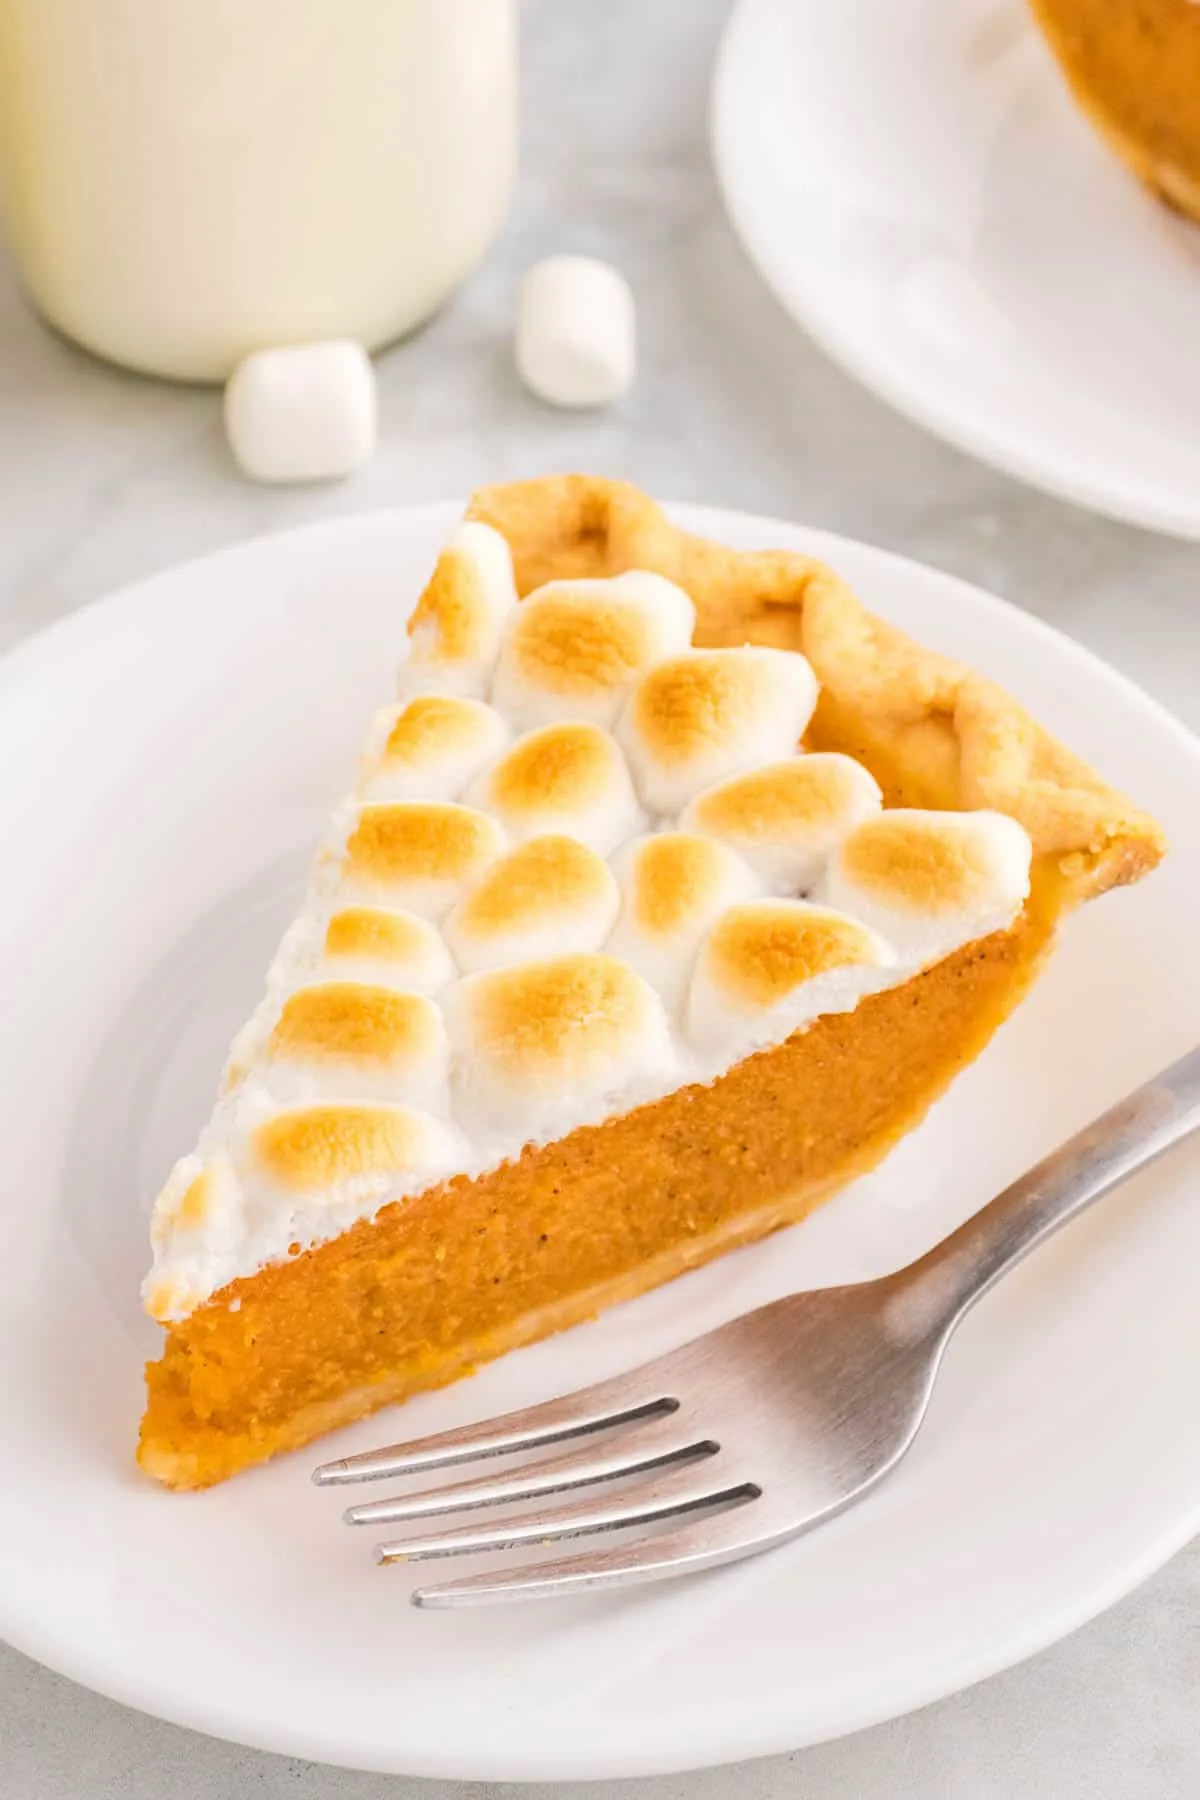 Sweet Potato Pie with Marshmallows is a classic Thanksgiving and Christmas dessert made with mashed sweet potatoes combined with butter, sugar, eggs, evaporated milk, cinnamon, nutmeg and ginger, baked in a flaky pie crust and topped with mini marshmallows.